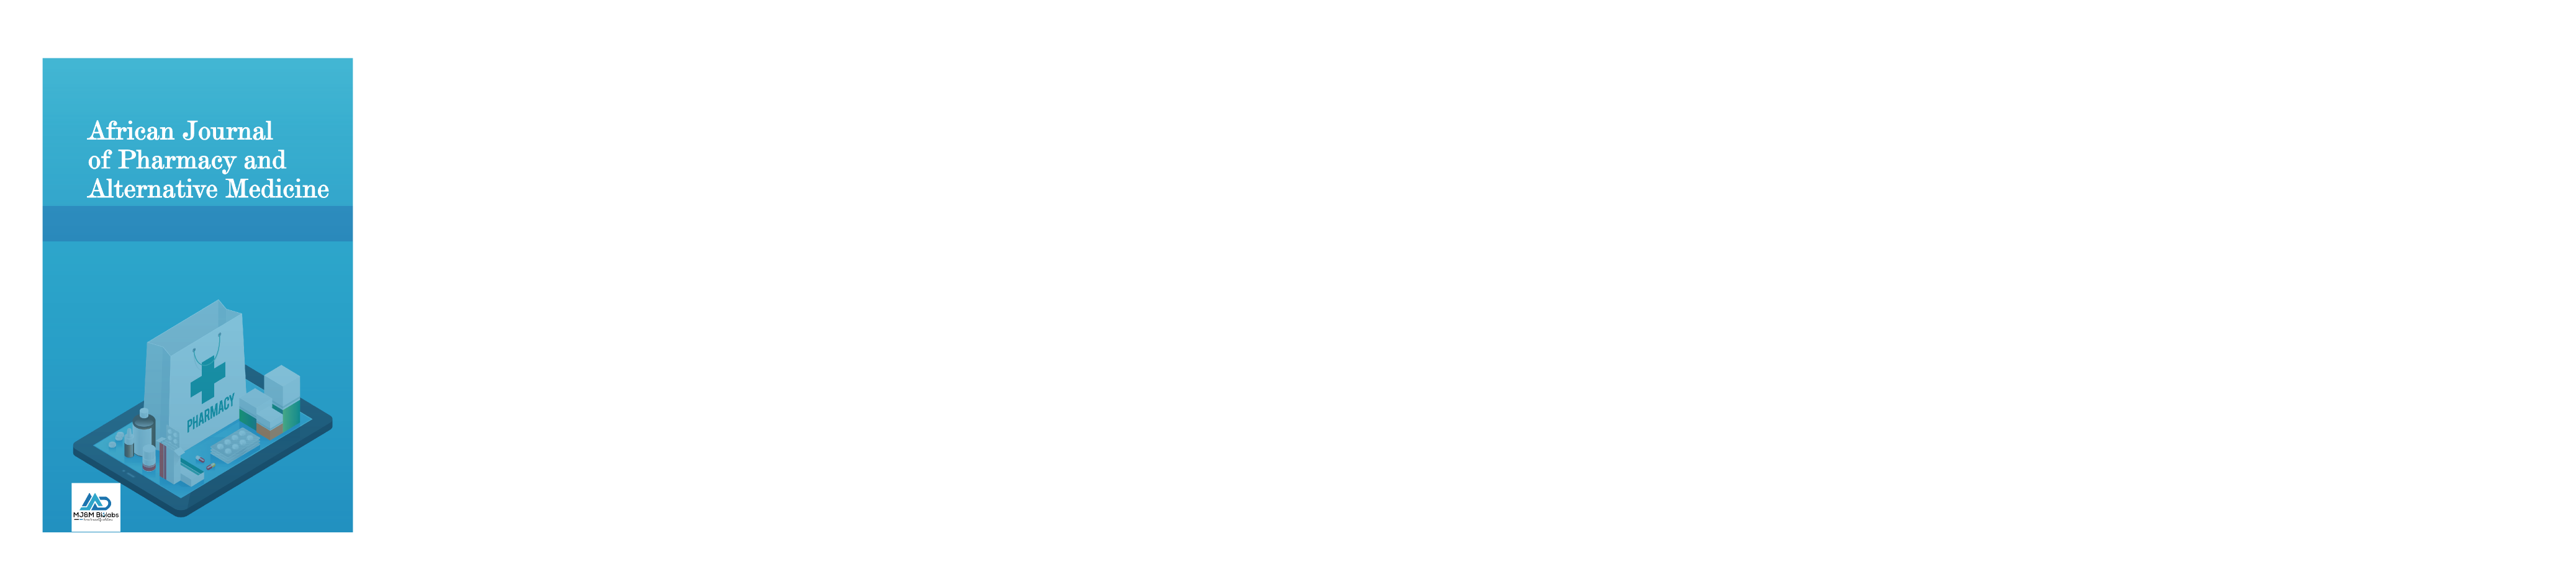 African Journal of Pharmacy and Alternative Medicine